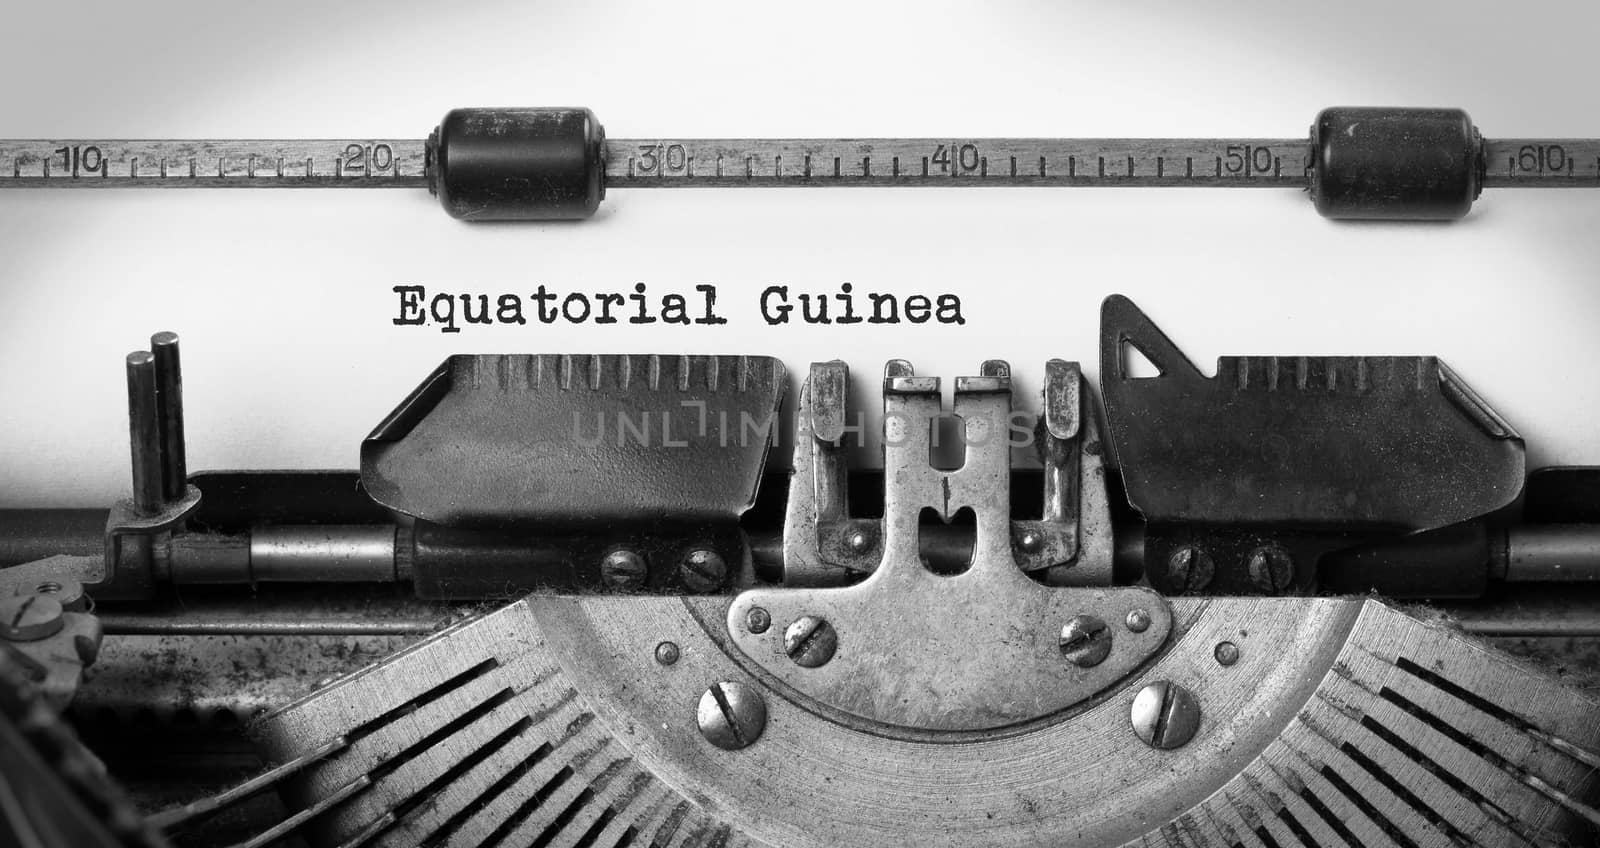 Old typewriter - Equatorial Guinea by michaklootwijk